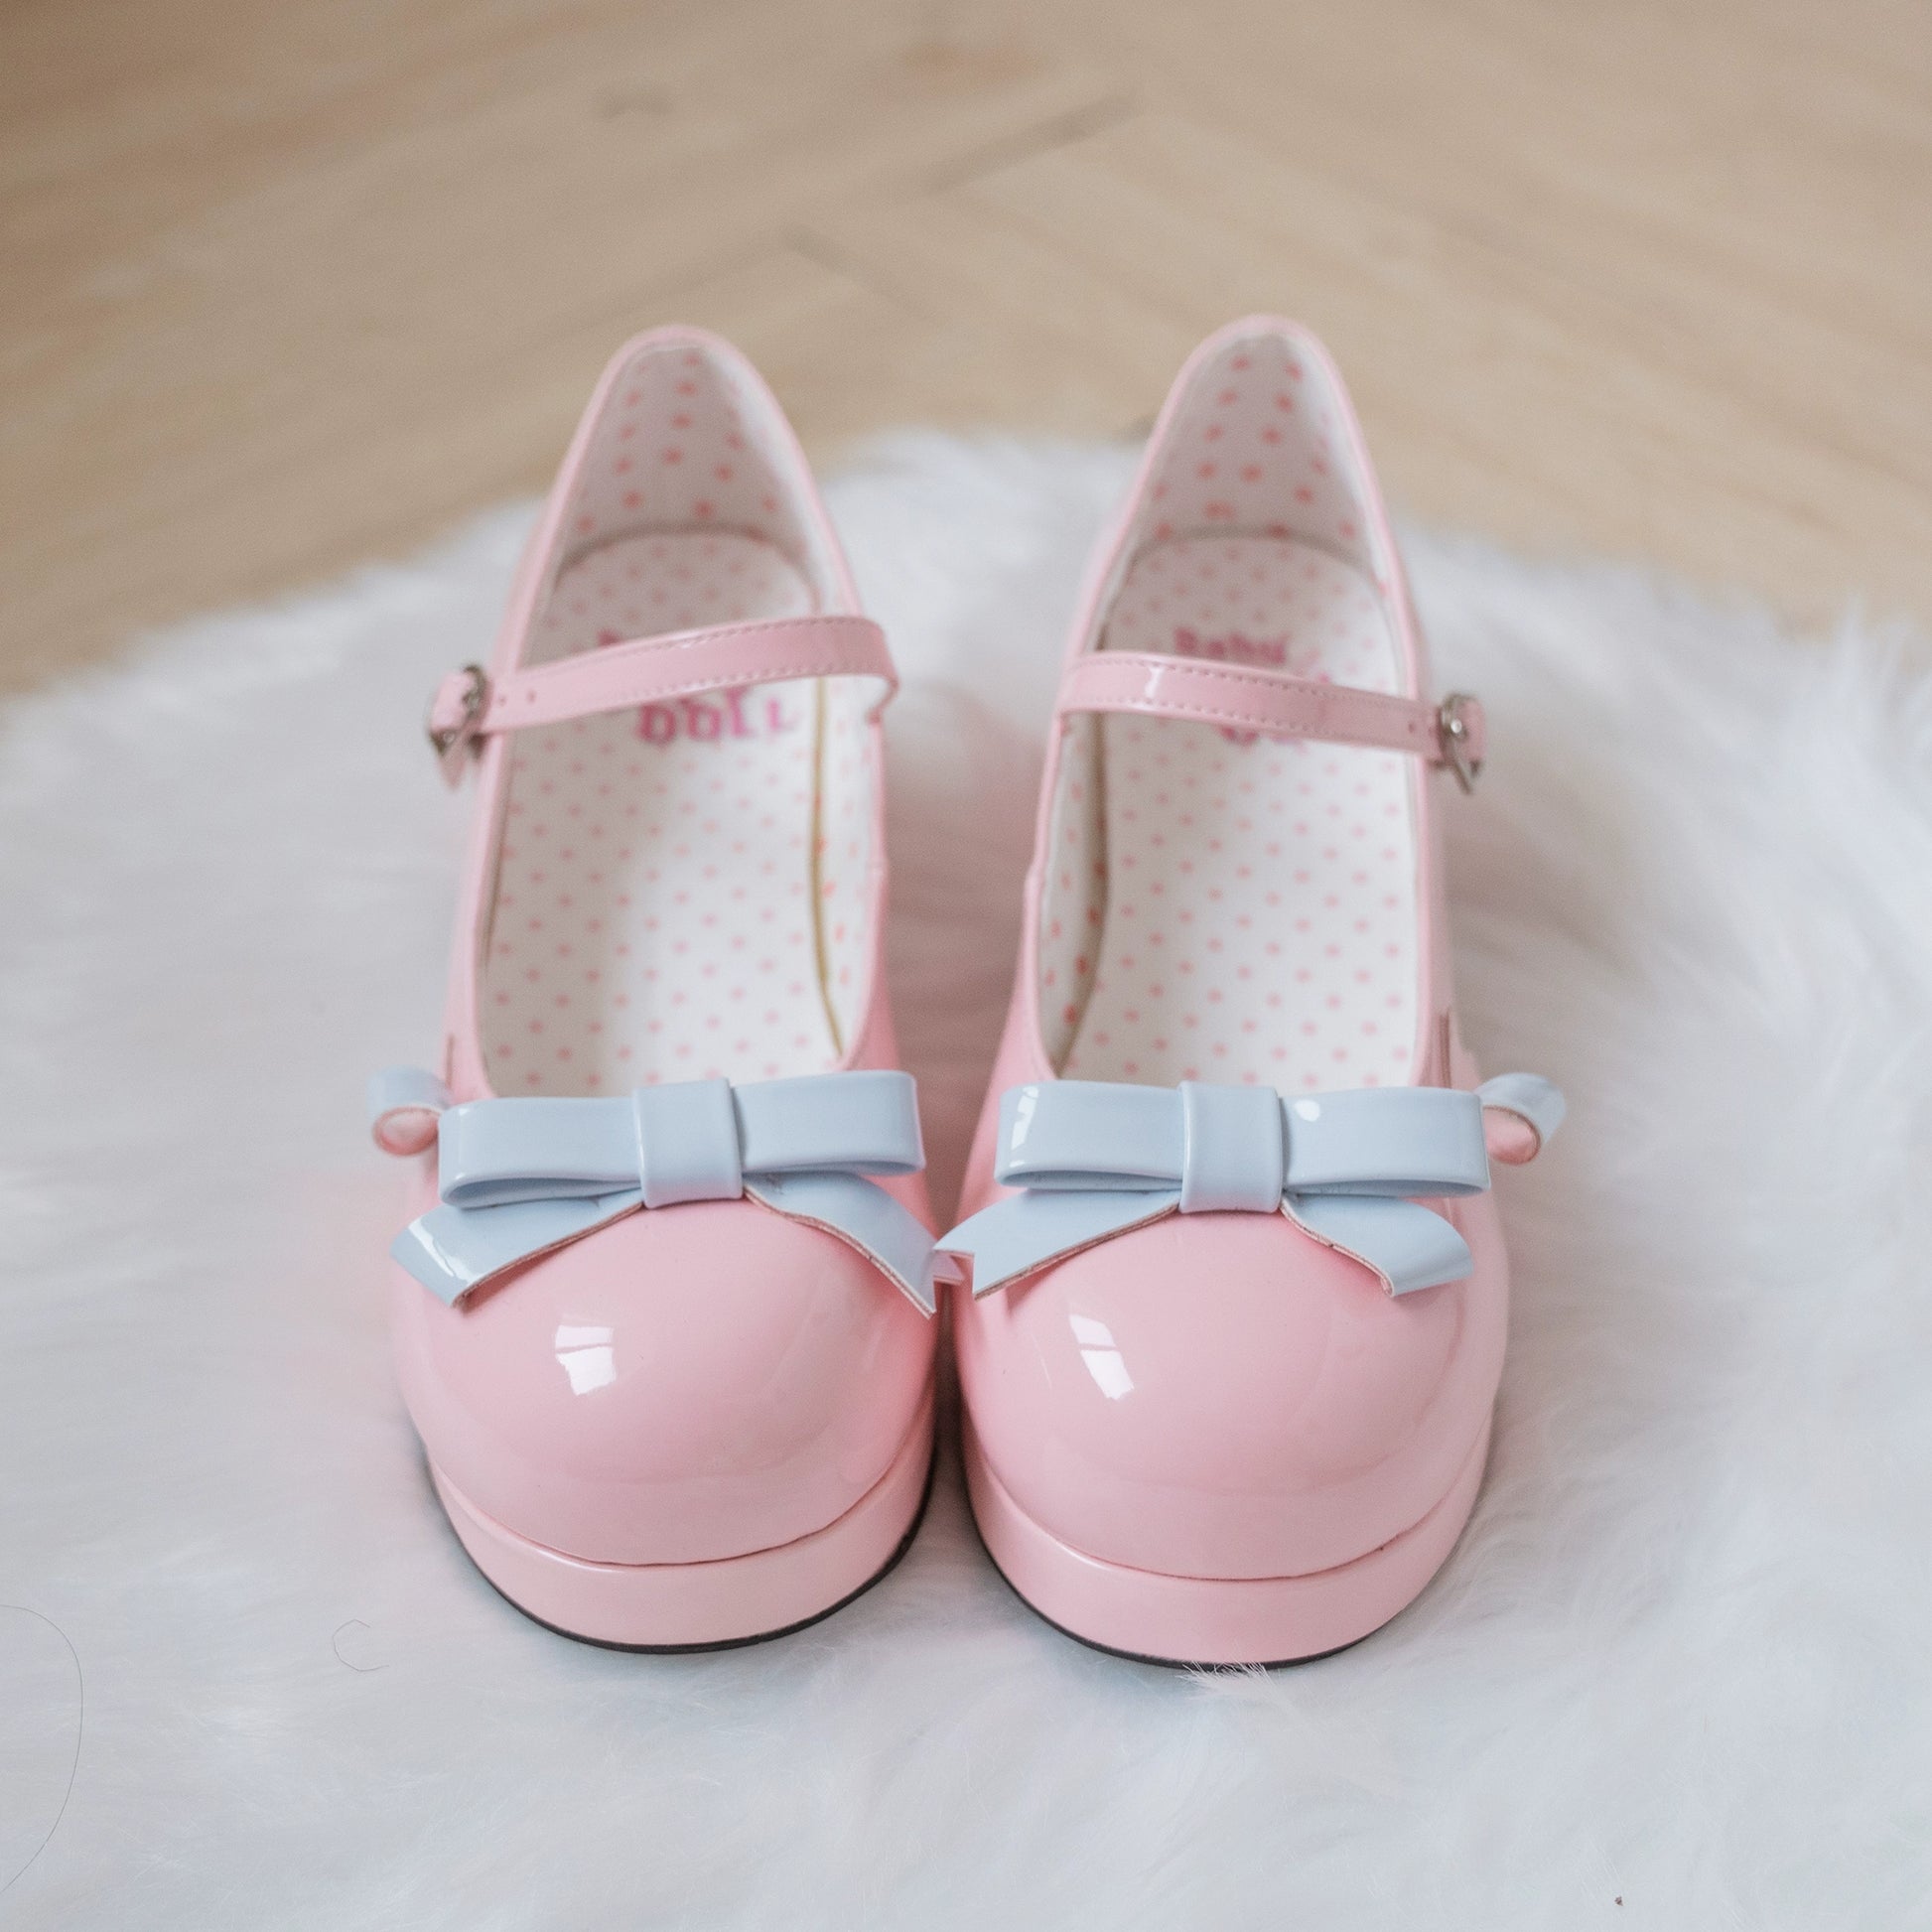 Lolita Shoes High Heels With Bowknot Shallow Mouth Shoes 37026:556834